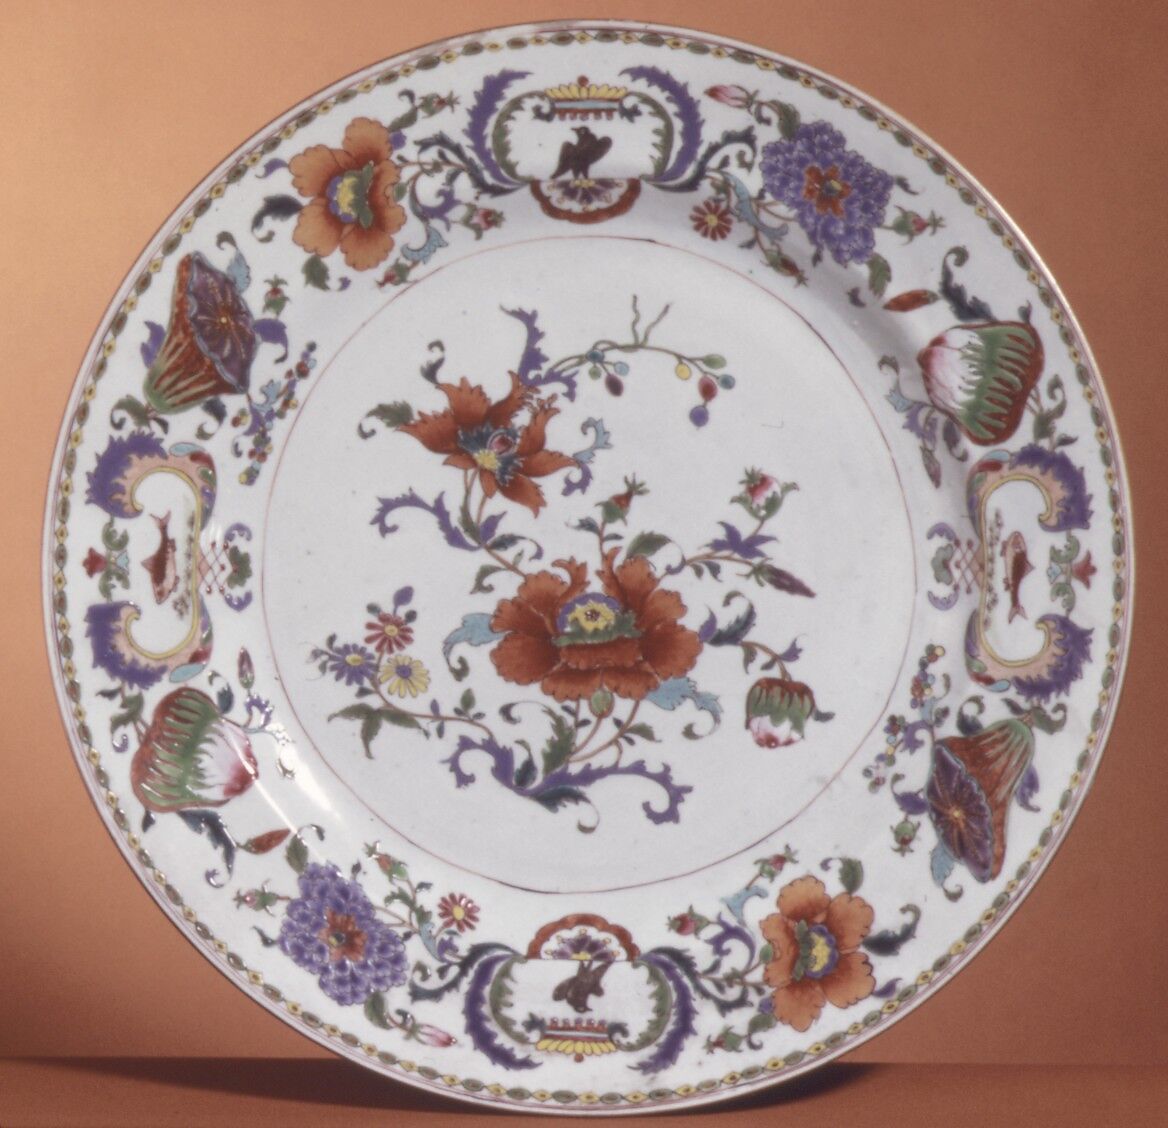 Dish, Hard-paste porcelain, Chinese, for European, probably French, market 